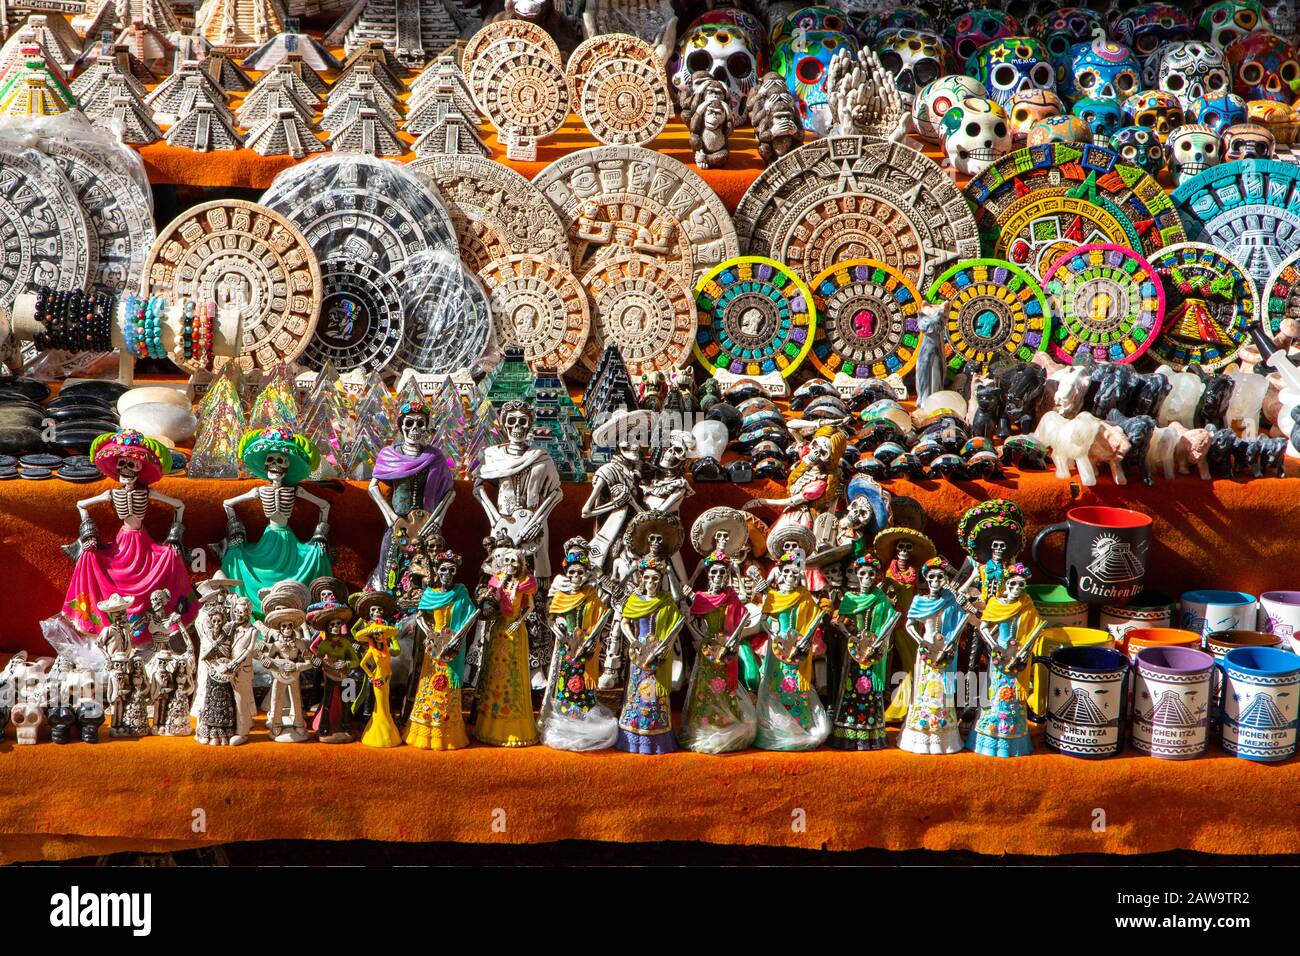 Typical carved wooden souvenirs at a local Mexican market in Chichen Itza, Yucatan Peninsula, Mexico. Stock Photo